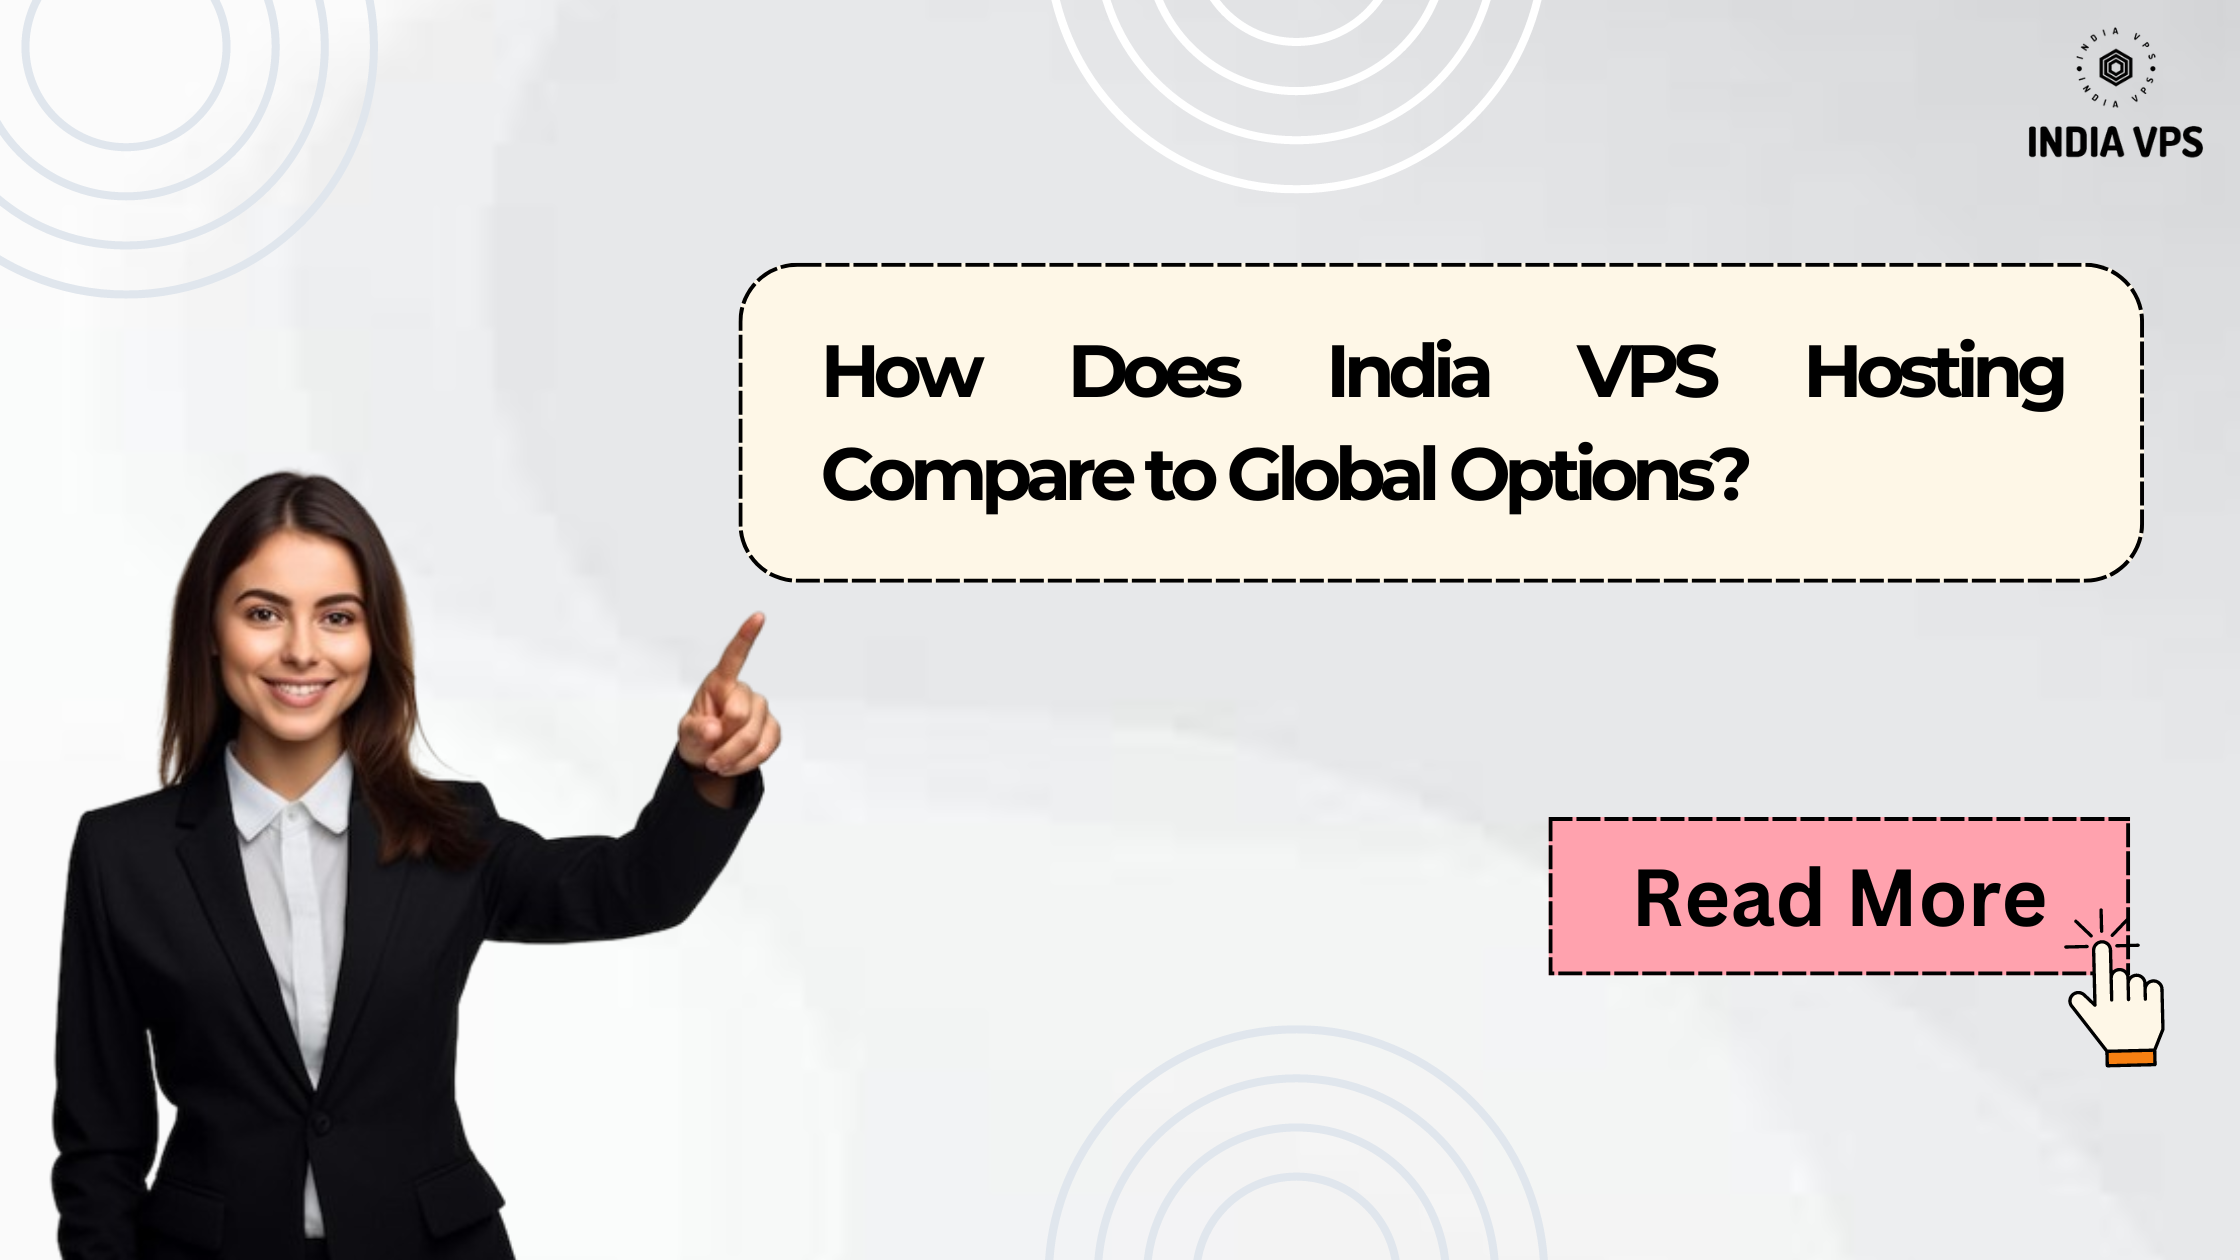 How Does India VPS Hosting Compare to Global Options